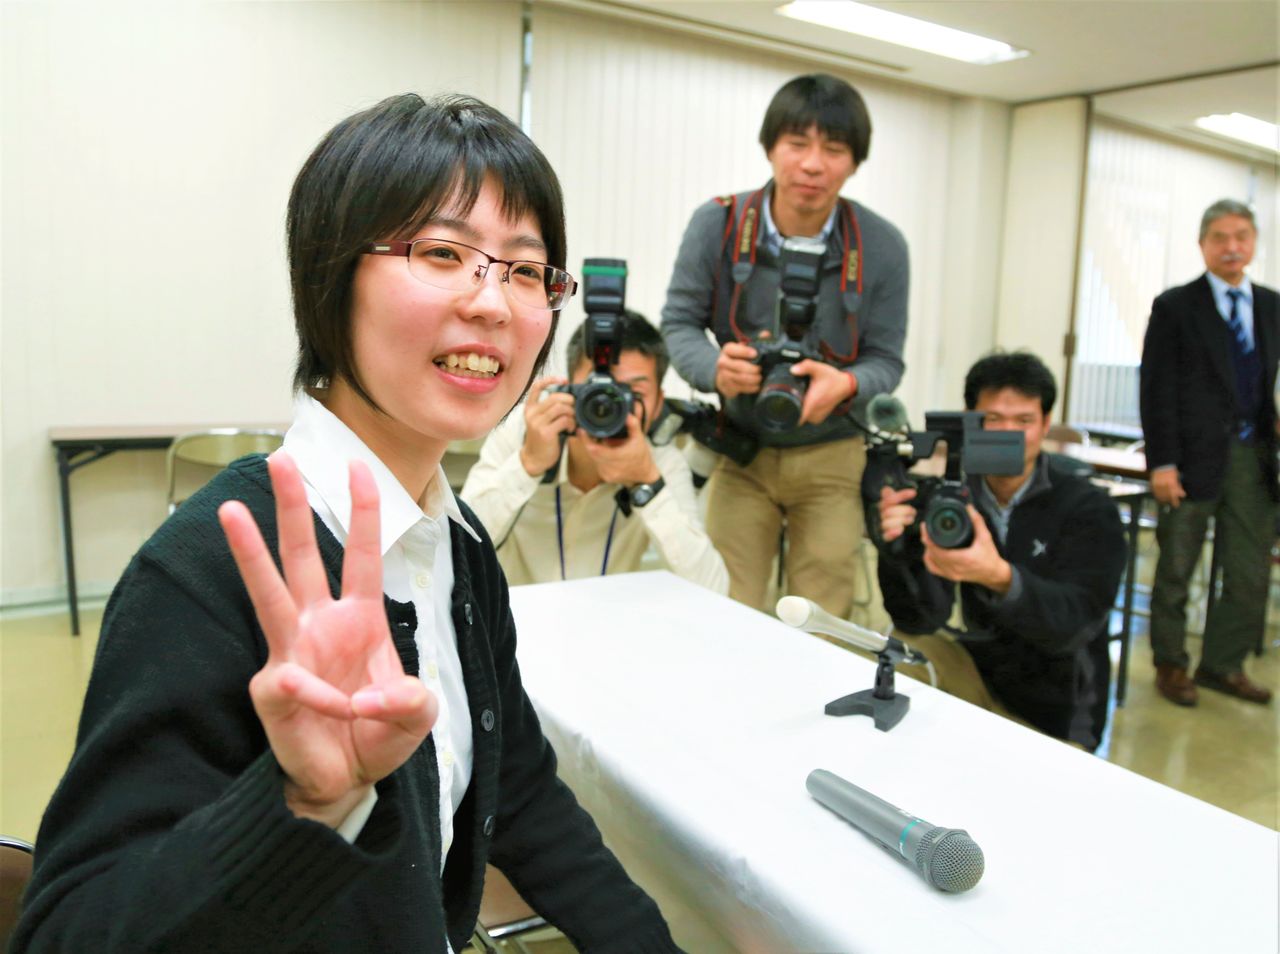 A smiling Satomi flashes three fingers during a press conference on December 23, 2013, at the Kansai Shōgi Kaikan in Osaka after becoming the first woman to attain the third dan. (© Jiji)